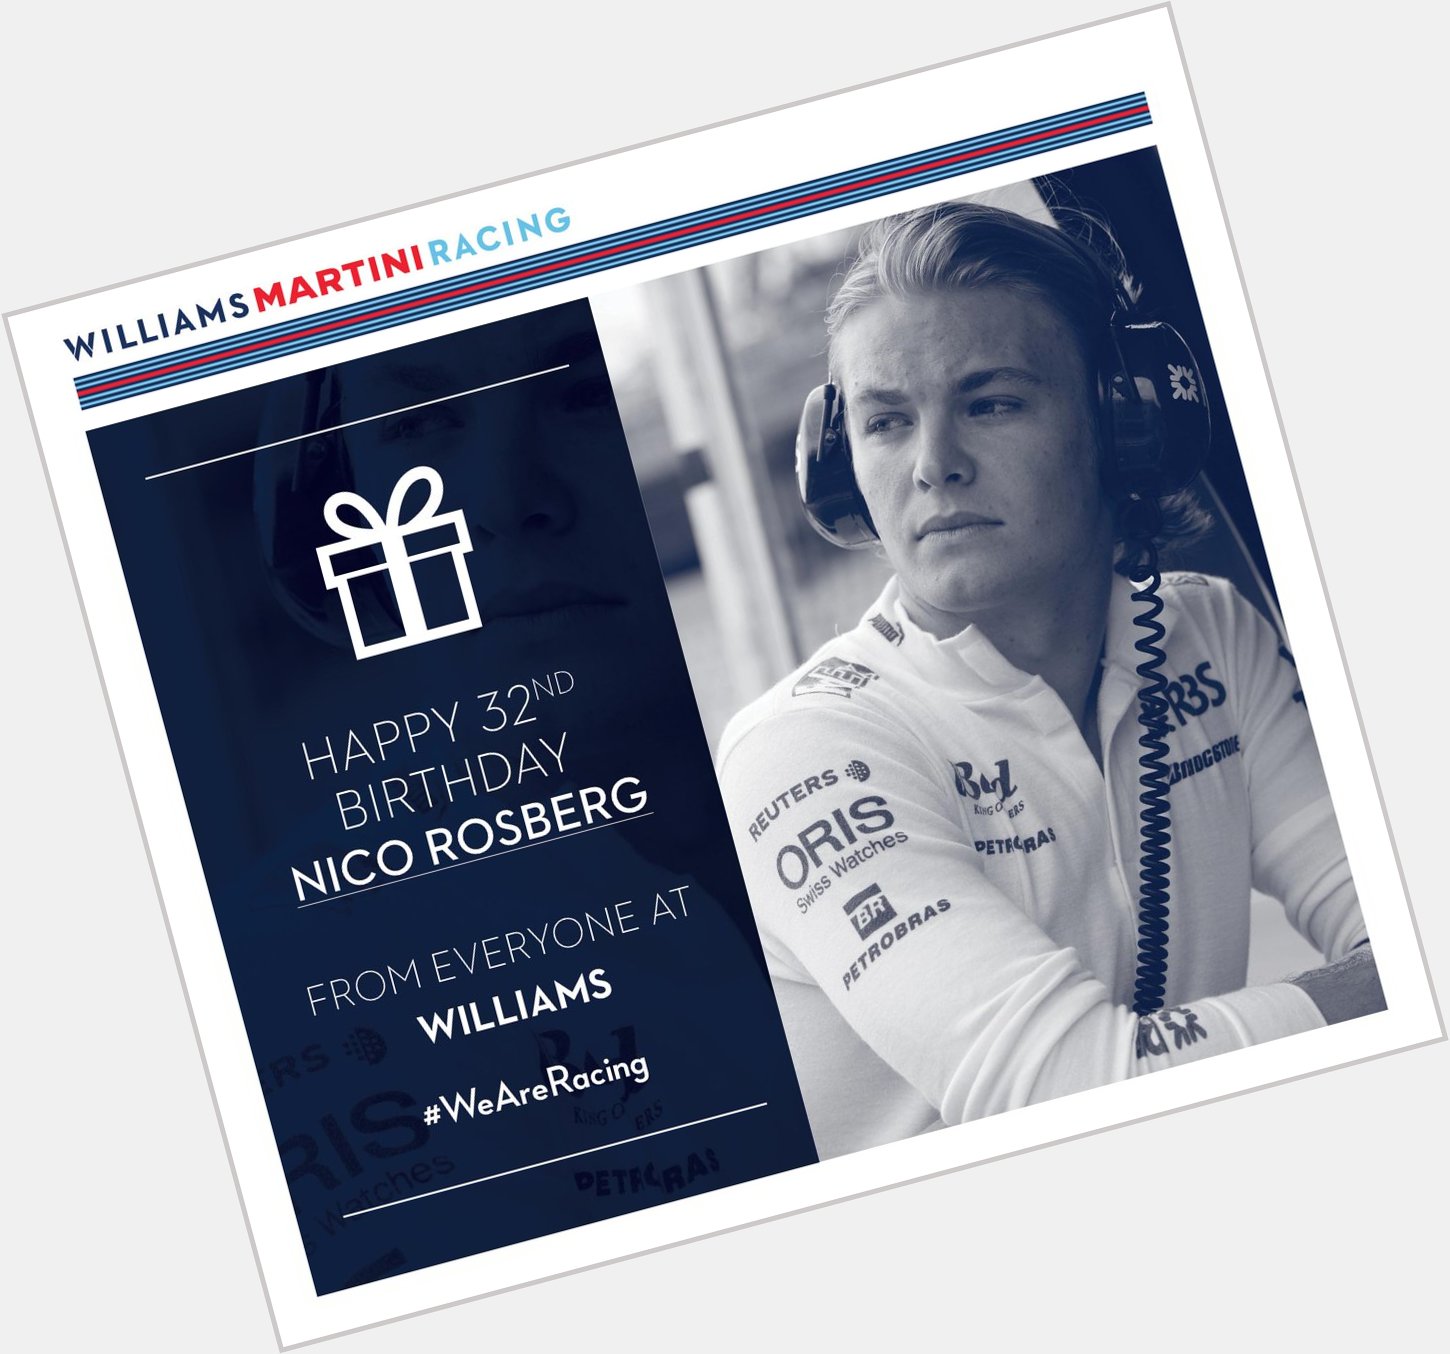 Everyone at Williams would like to wish a very Happy Birthday! 